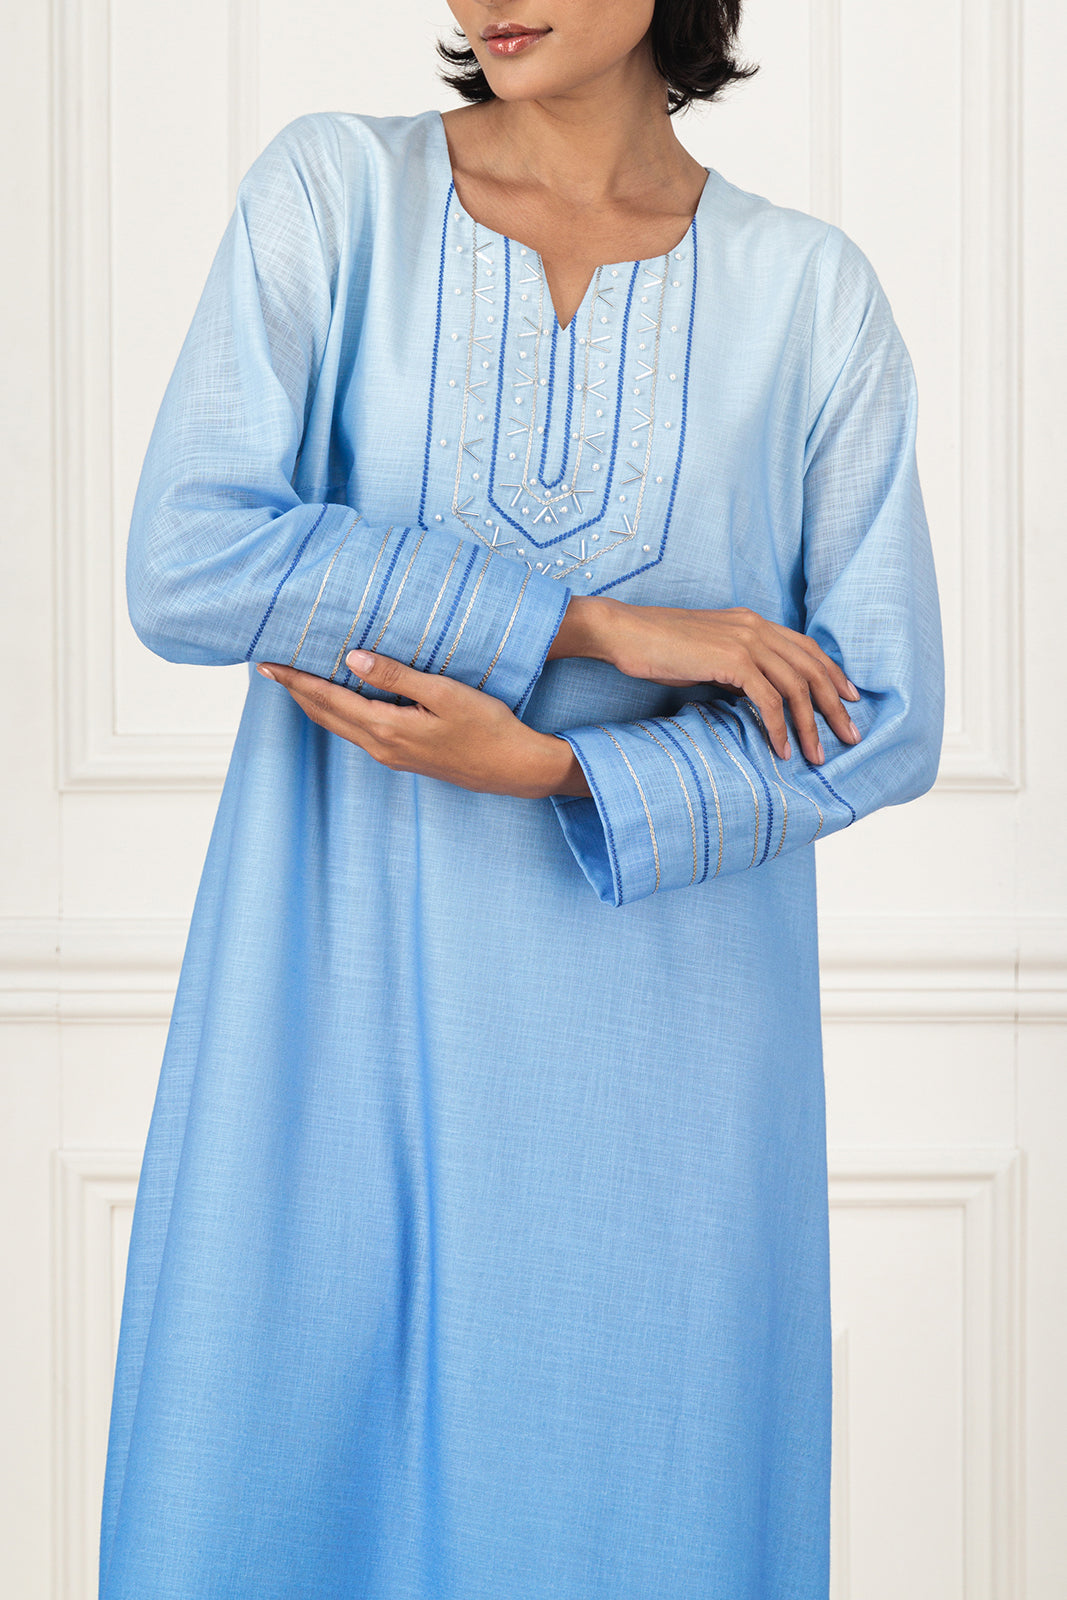 Linen ombre long sleeves